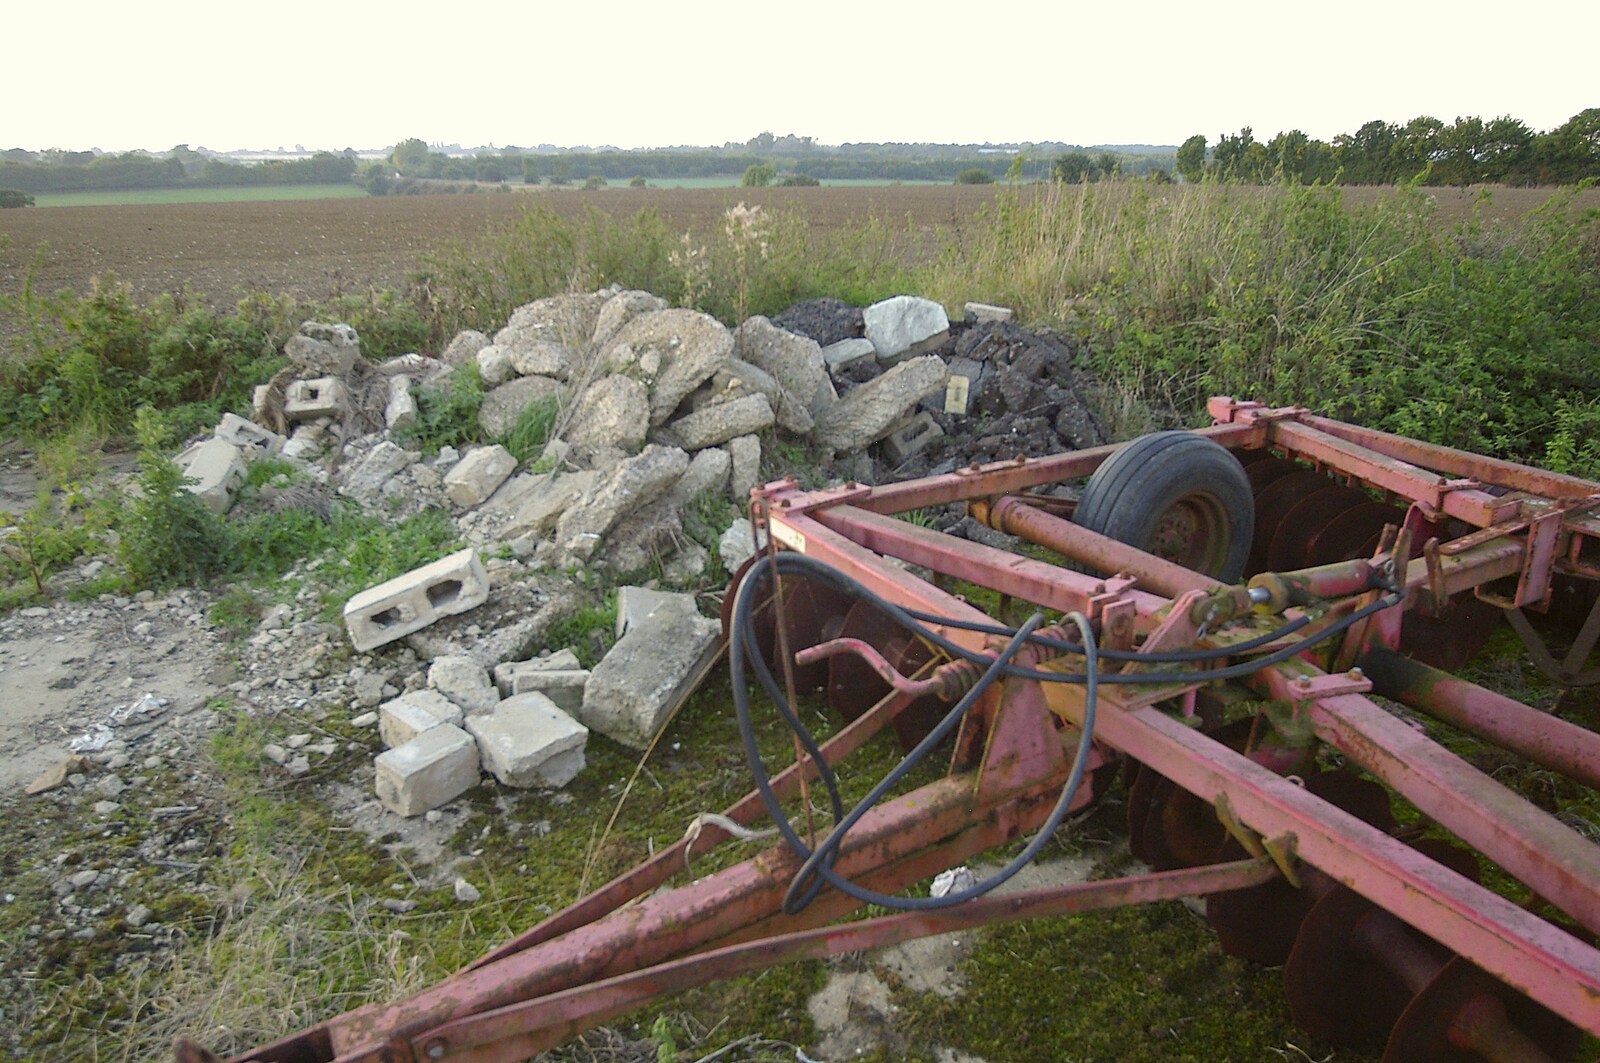 A pile of rubble and discarded farm equipment from The Destruction of Padley's, and Alex Hill at the Barrel, Diss and Banham - 12th November 2005